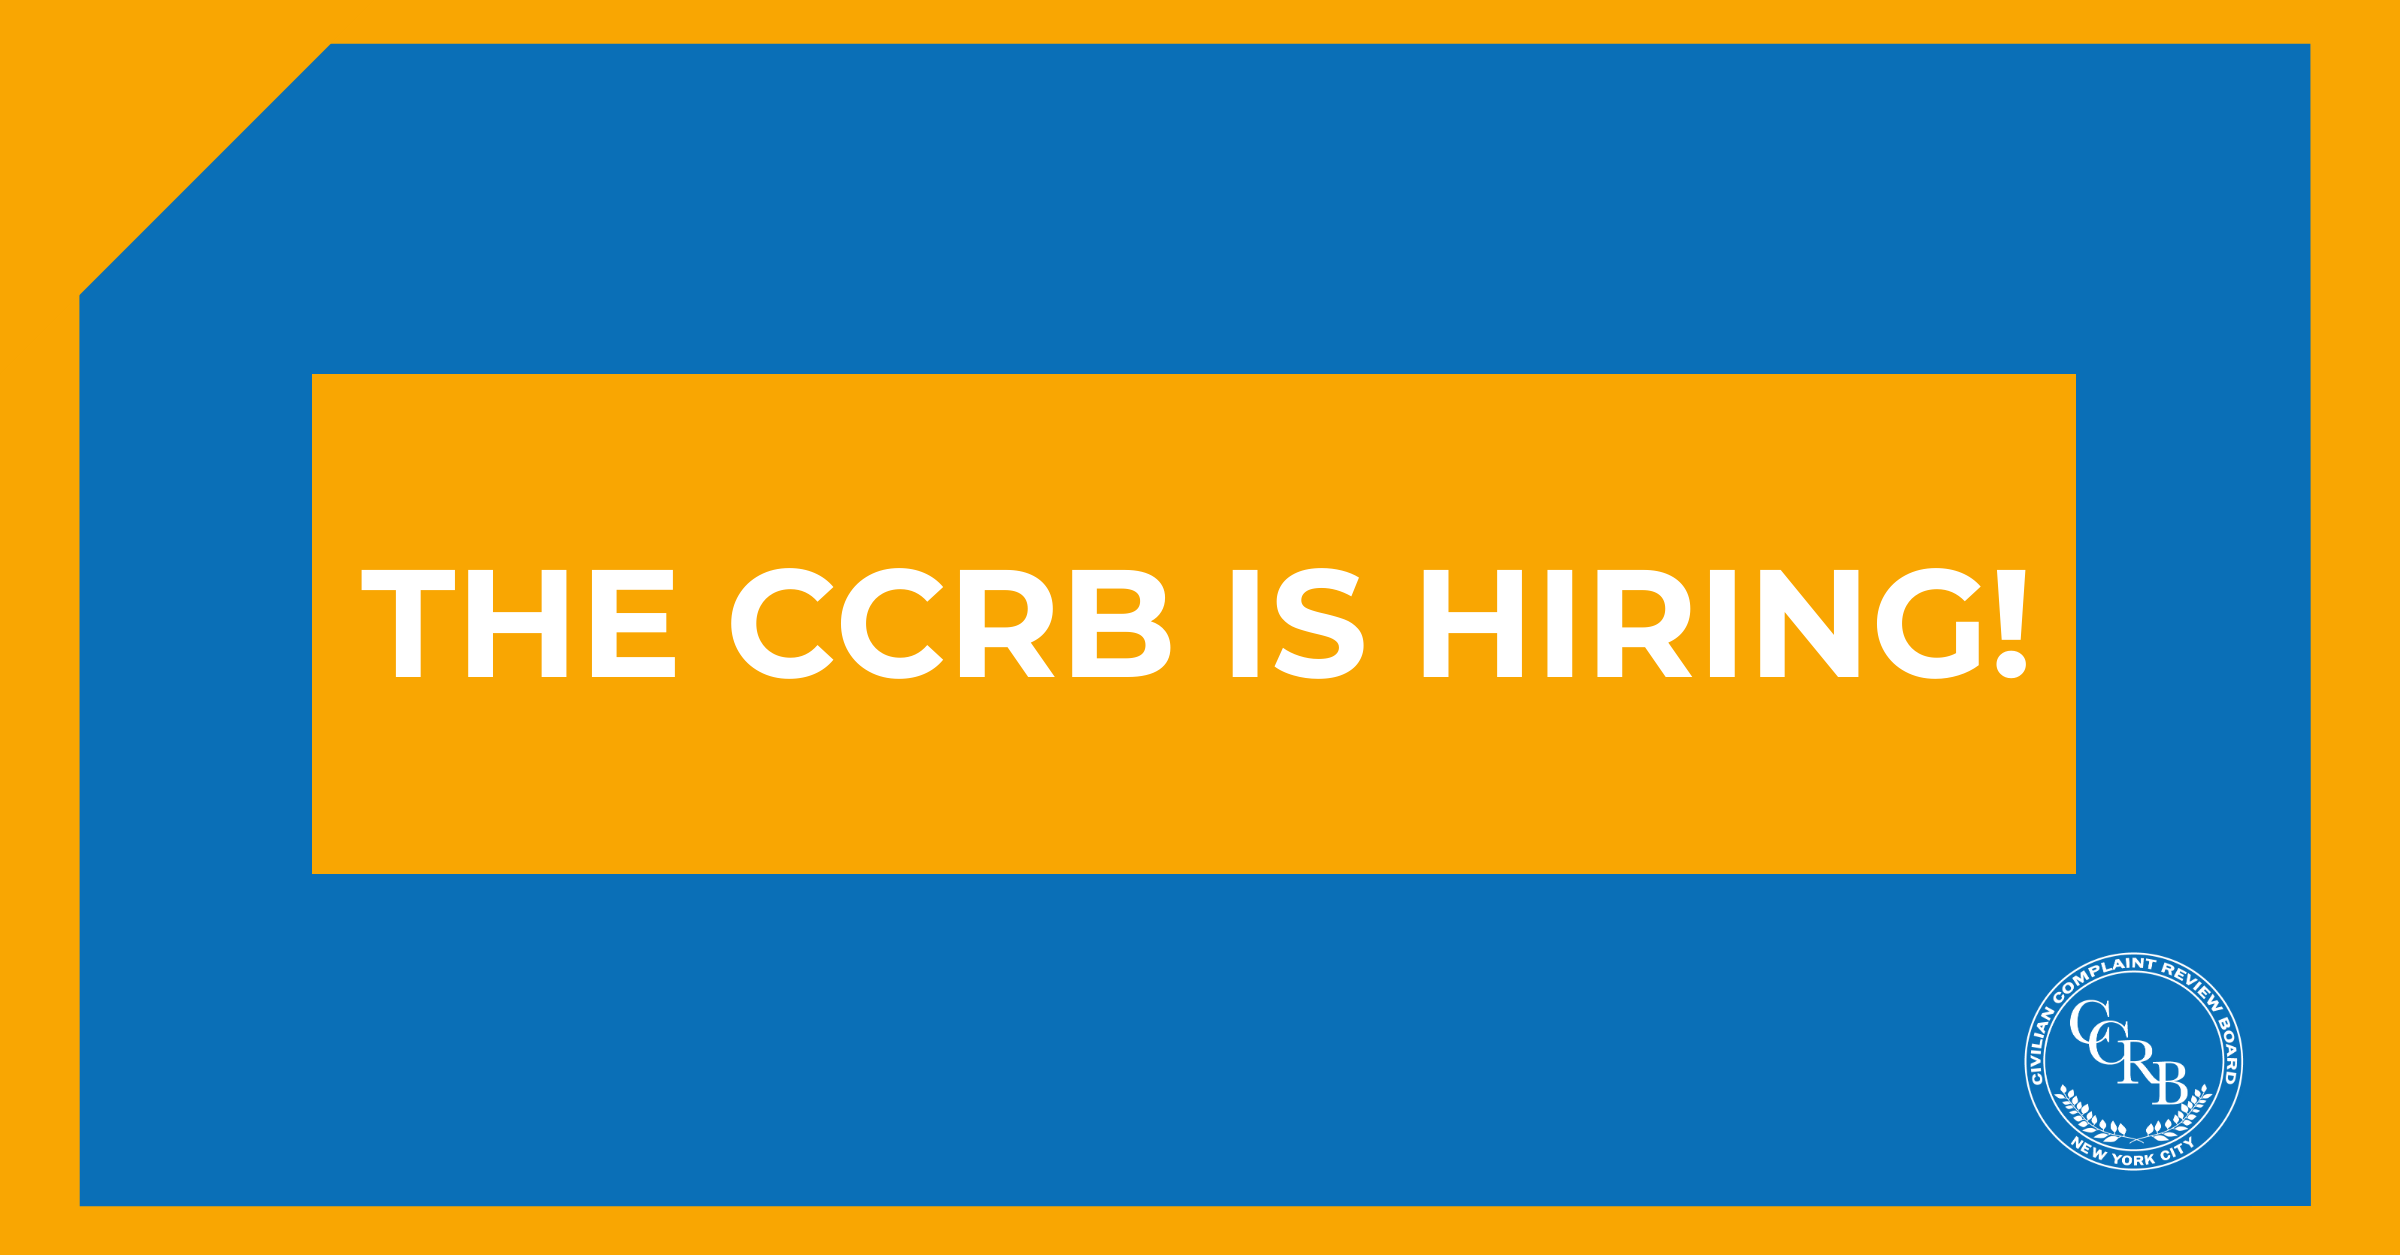 THE CCRB IS HIRING!
                                           